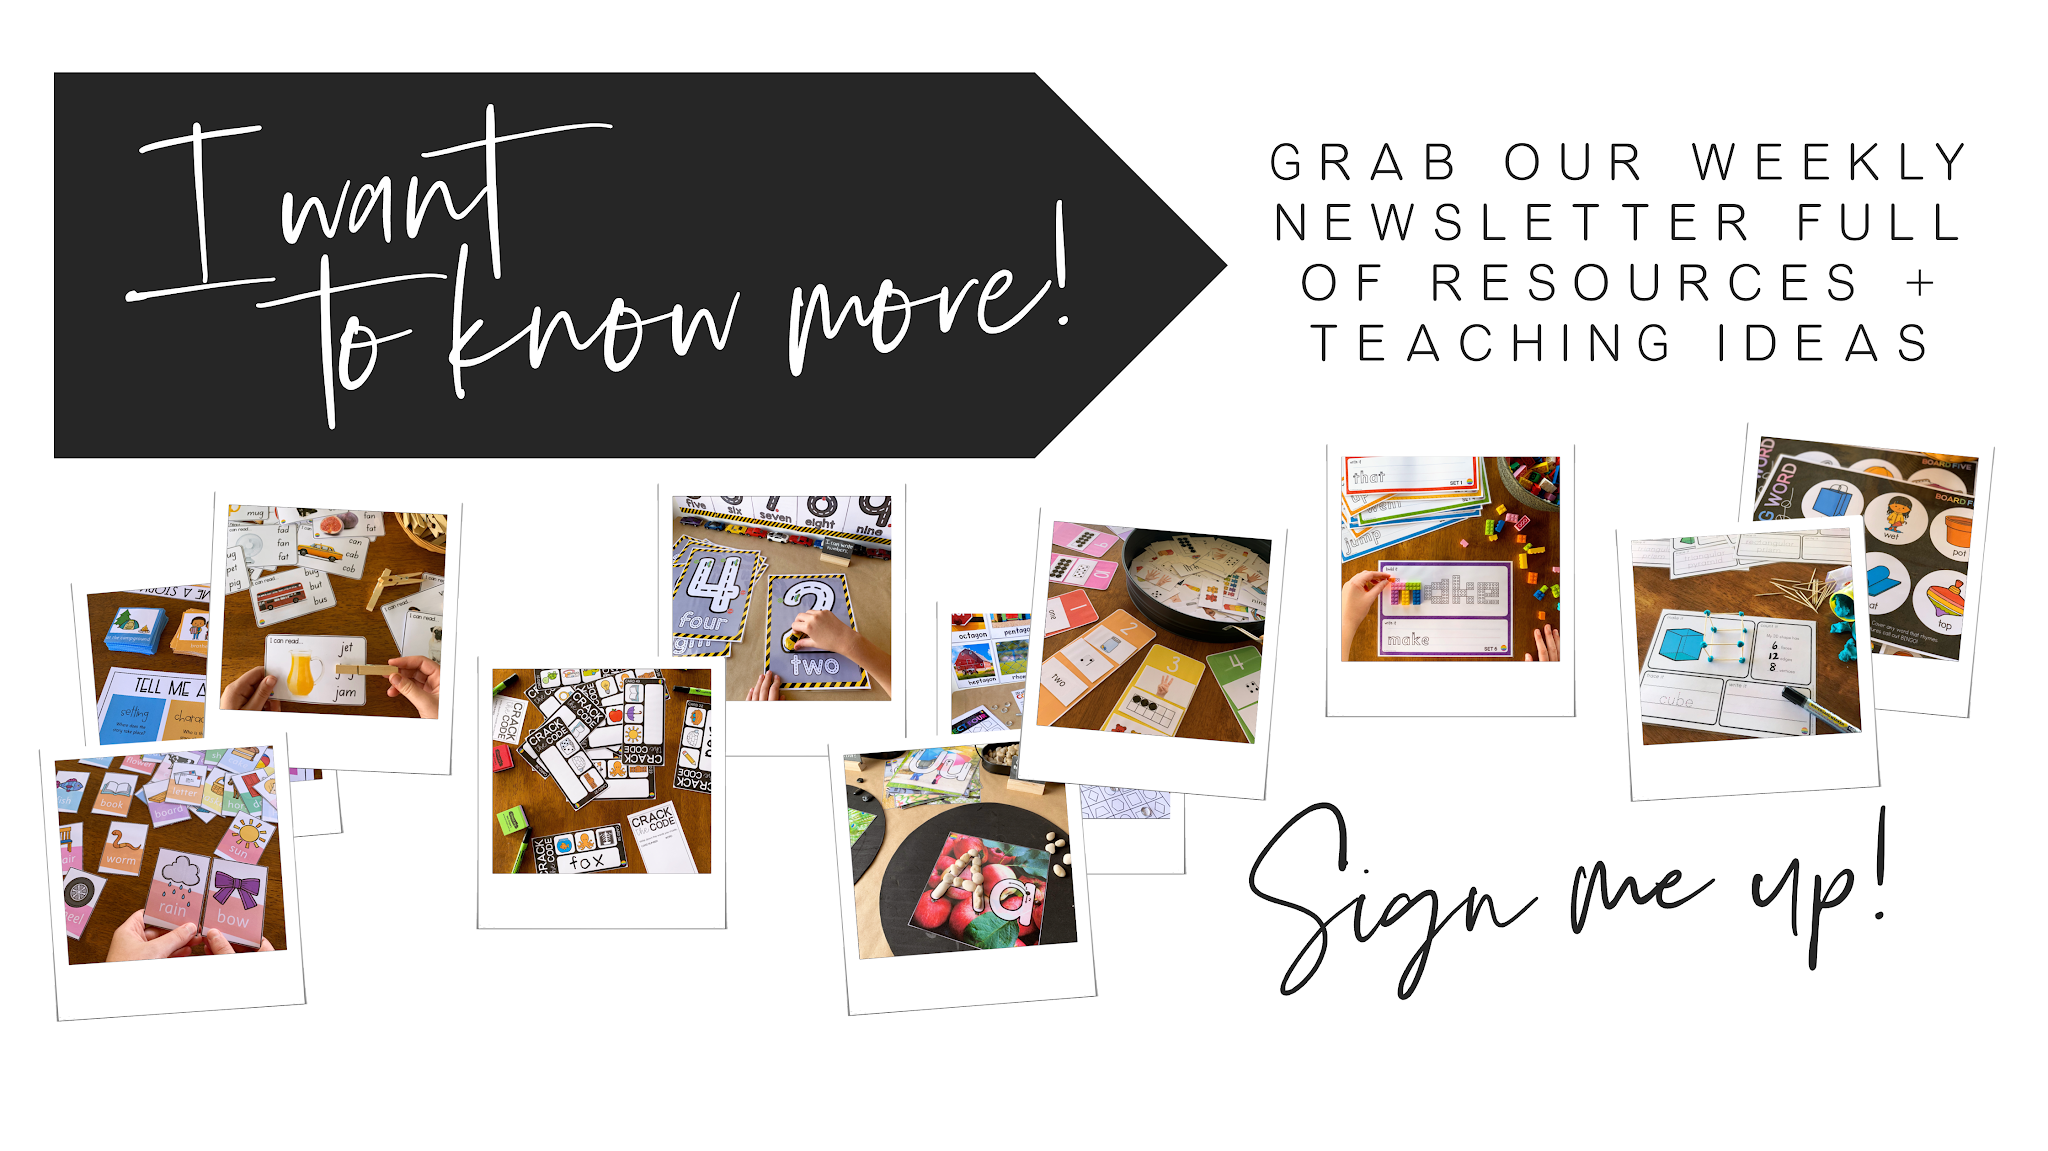 Add you details to our email list to find out about the latest teaching resources + classroom decor | you clever monkey